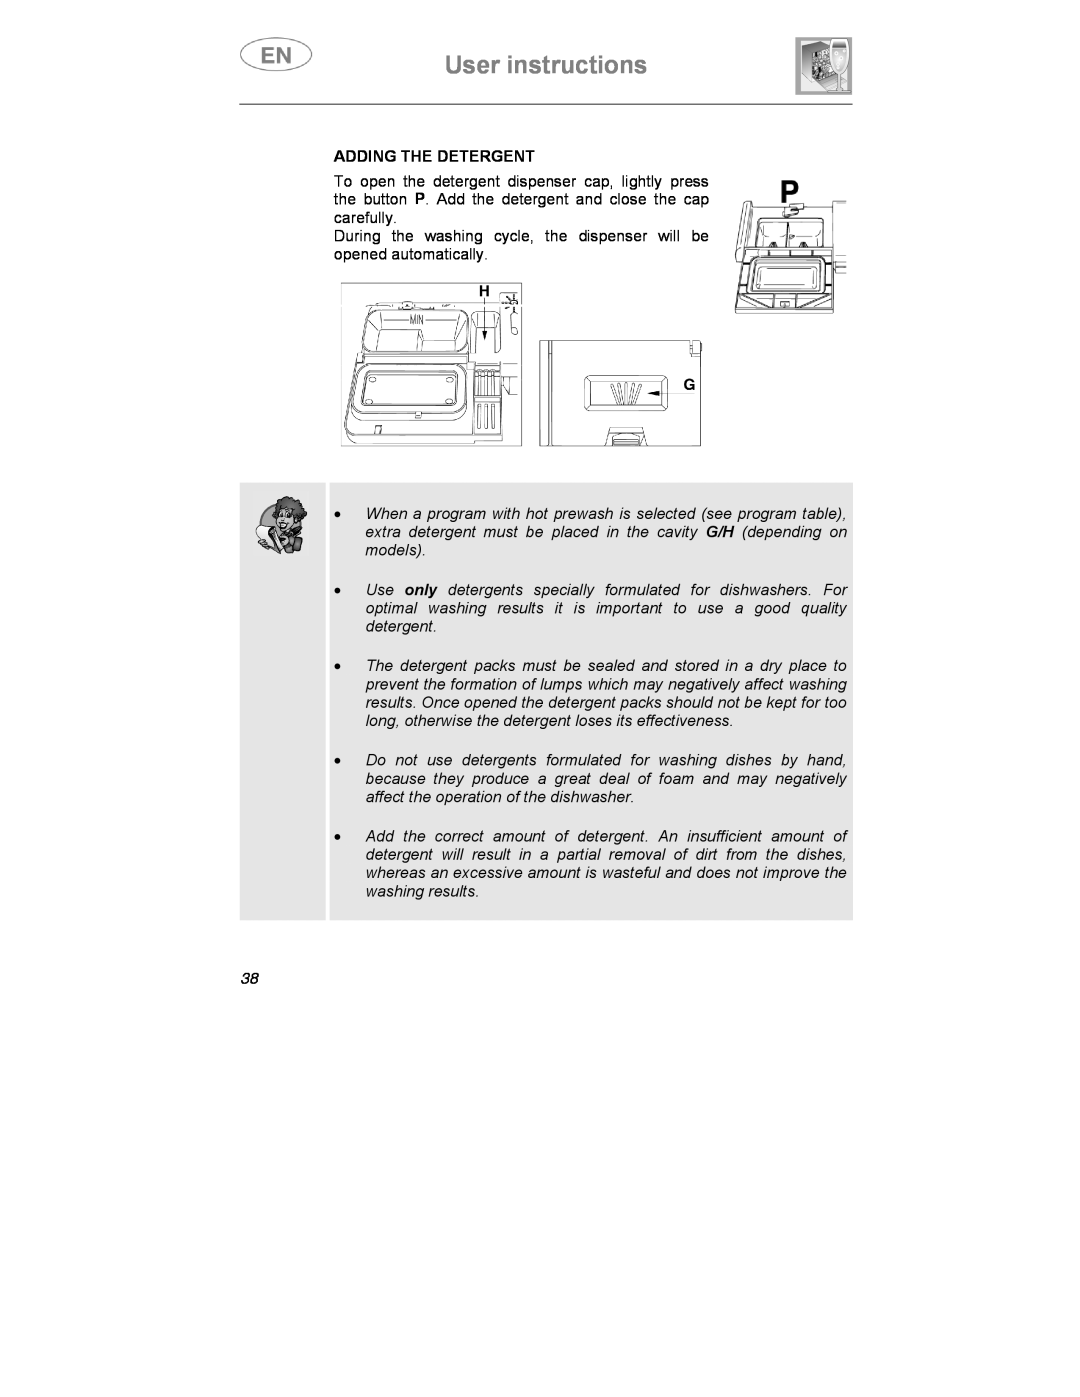 Smeg SDCY66-1, SDCY66X1 instruction manual User instructions, Adding The Detergent 